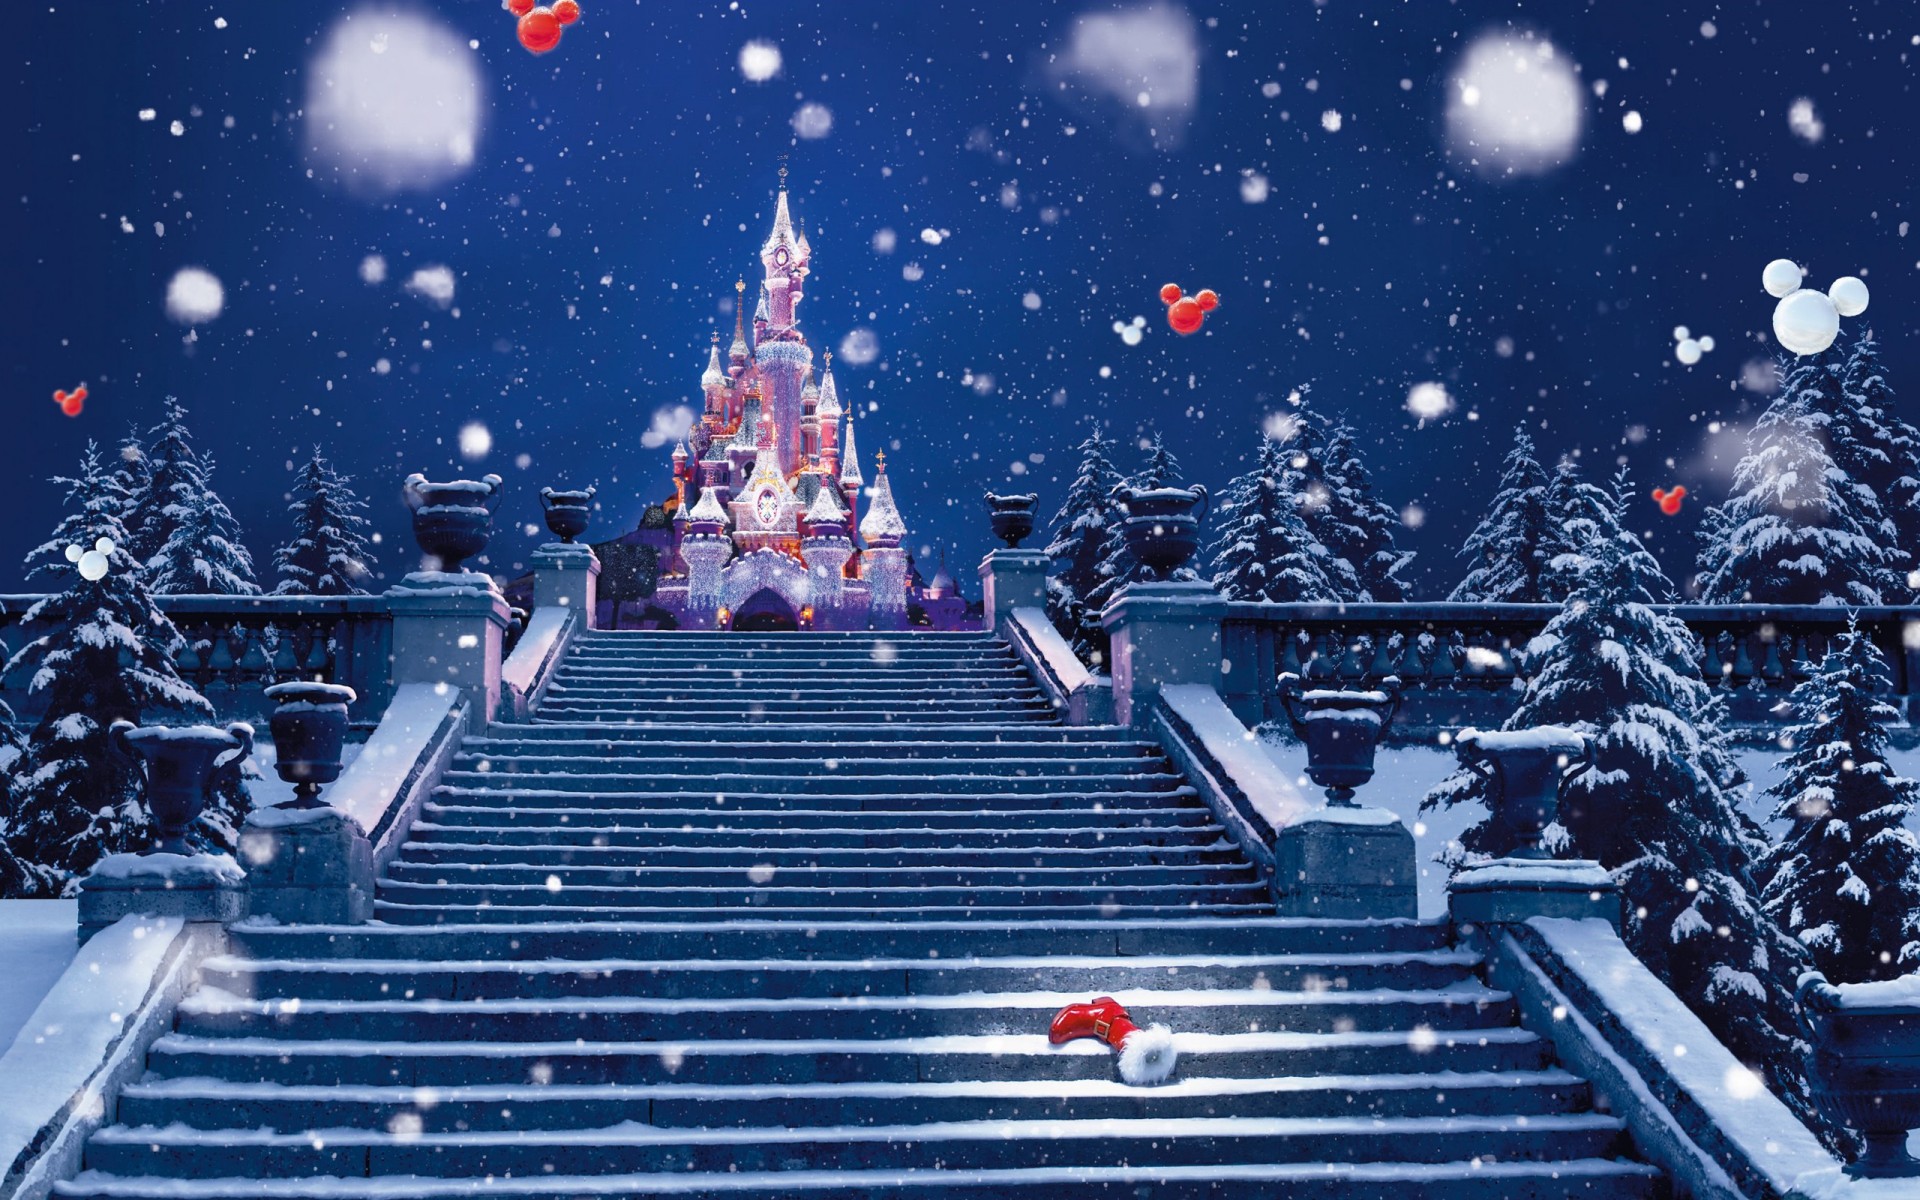 holidays, Christmas, Children, Disney, Winter, Snow, Snowing, Flakes, Drops, Stairs, Magical, Castle, Mickey Wallpaper HD / Desktop and Mobile Background